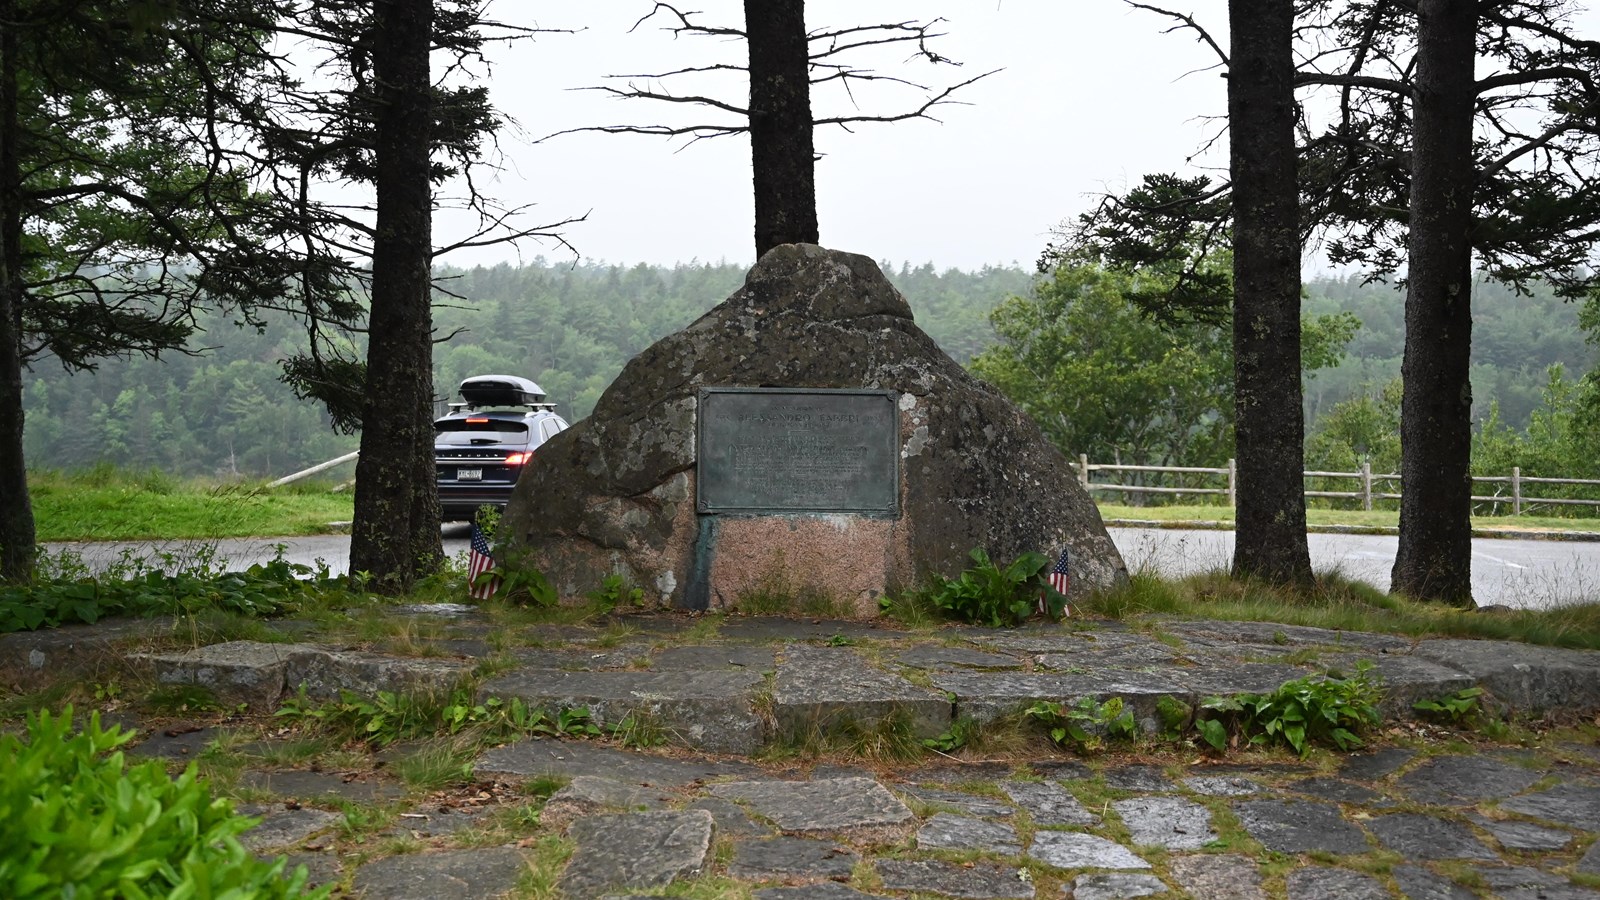 Large pointed rock with plaque on the middle